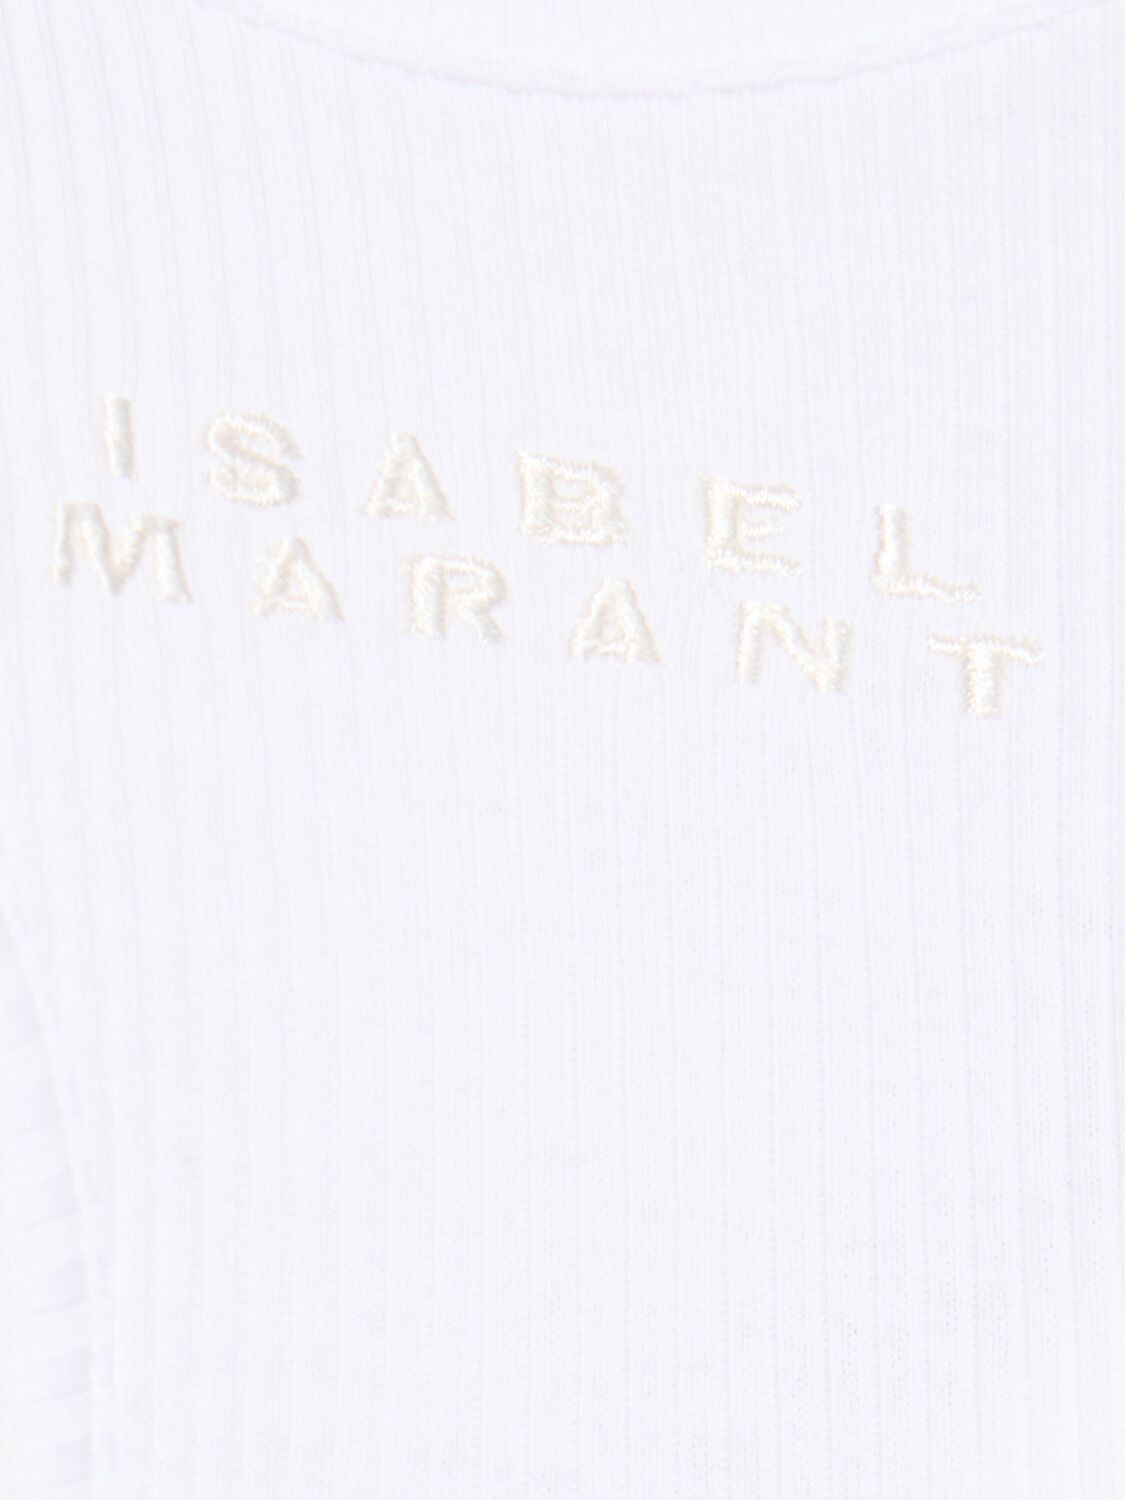 Shop Isabel Marant Tenesy Racerback Cotton Top In White